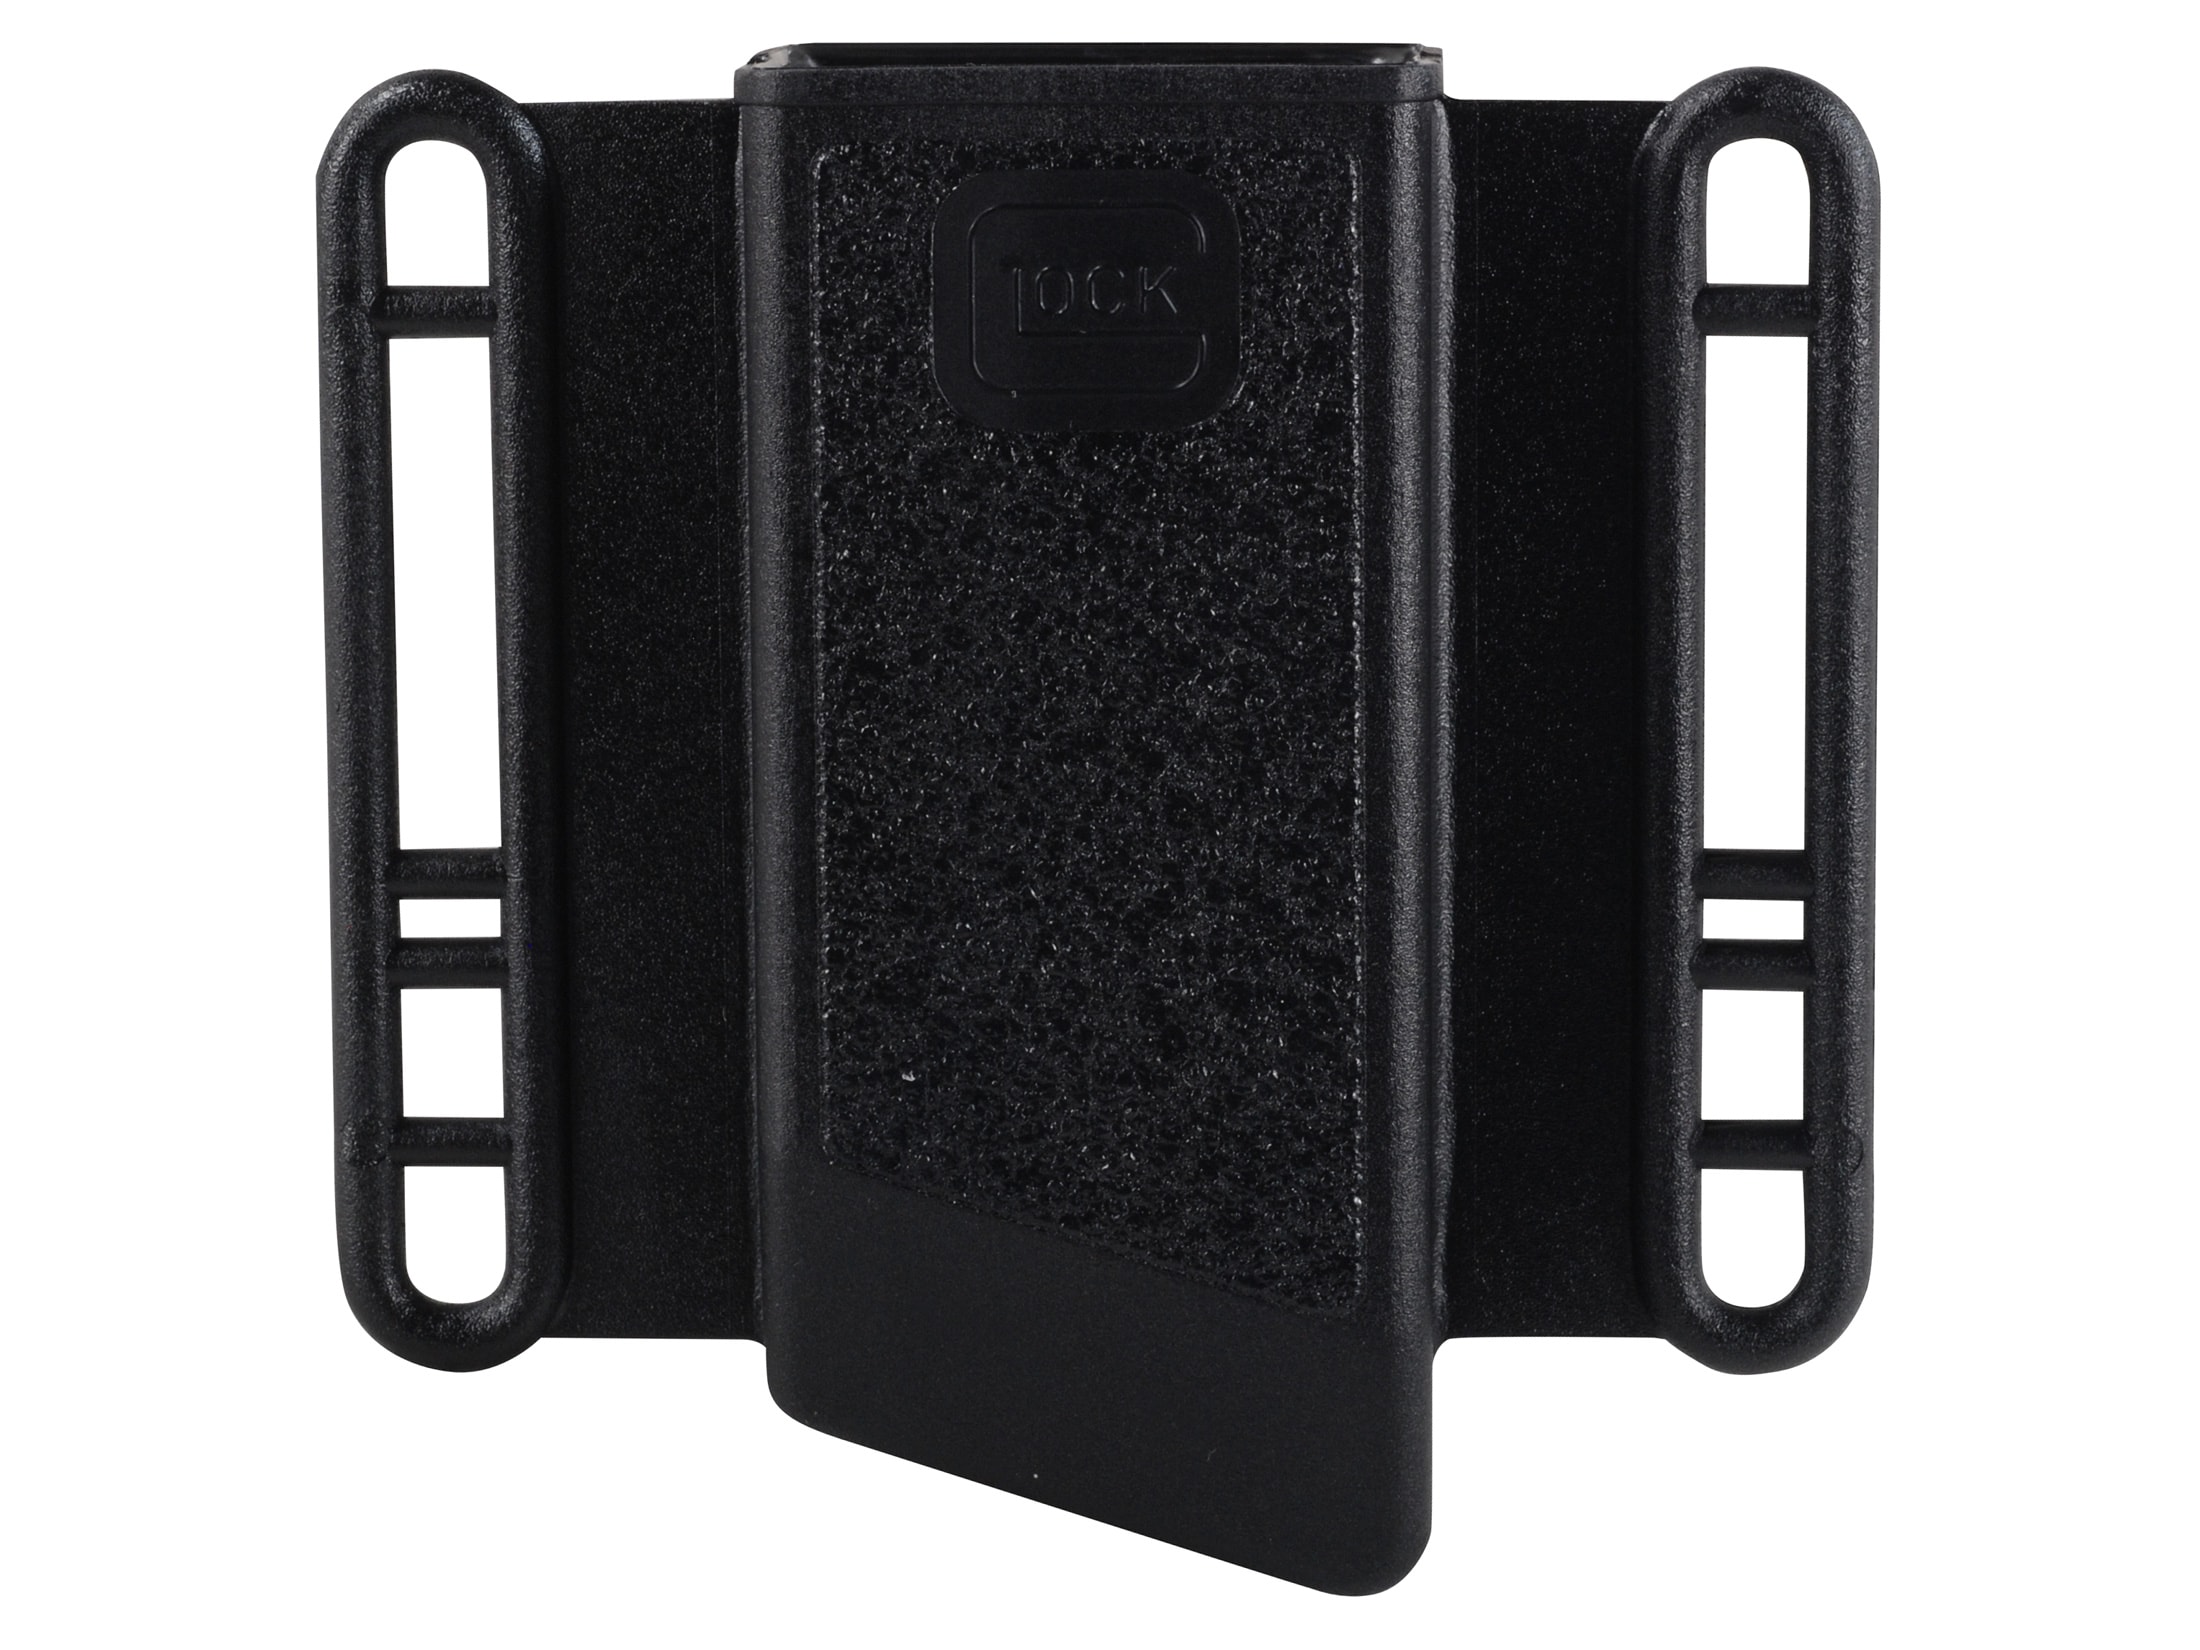 3X Glock Magazine 17/19/26/31/32/33/34 Wall Mount Hanger Holder Hold 3 Mags 